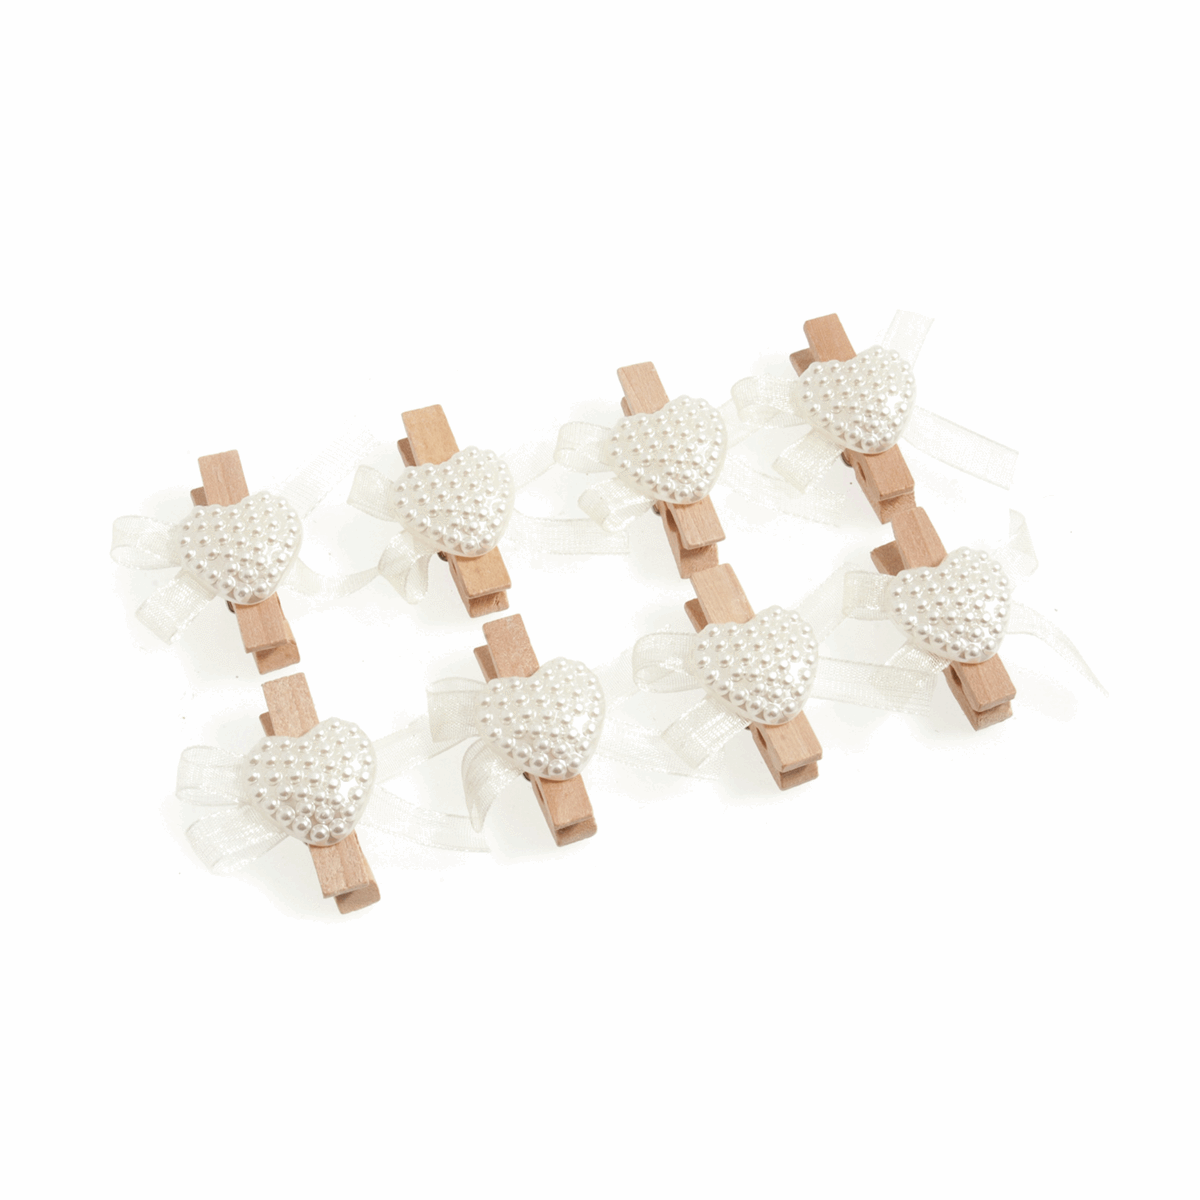 Ivory Pearl Textured Heart Wedding Pegs with Bows - 2cm (Pack of 8)